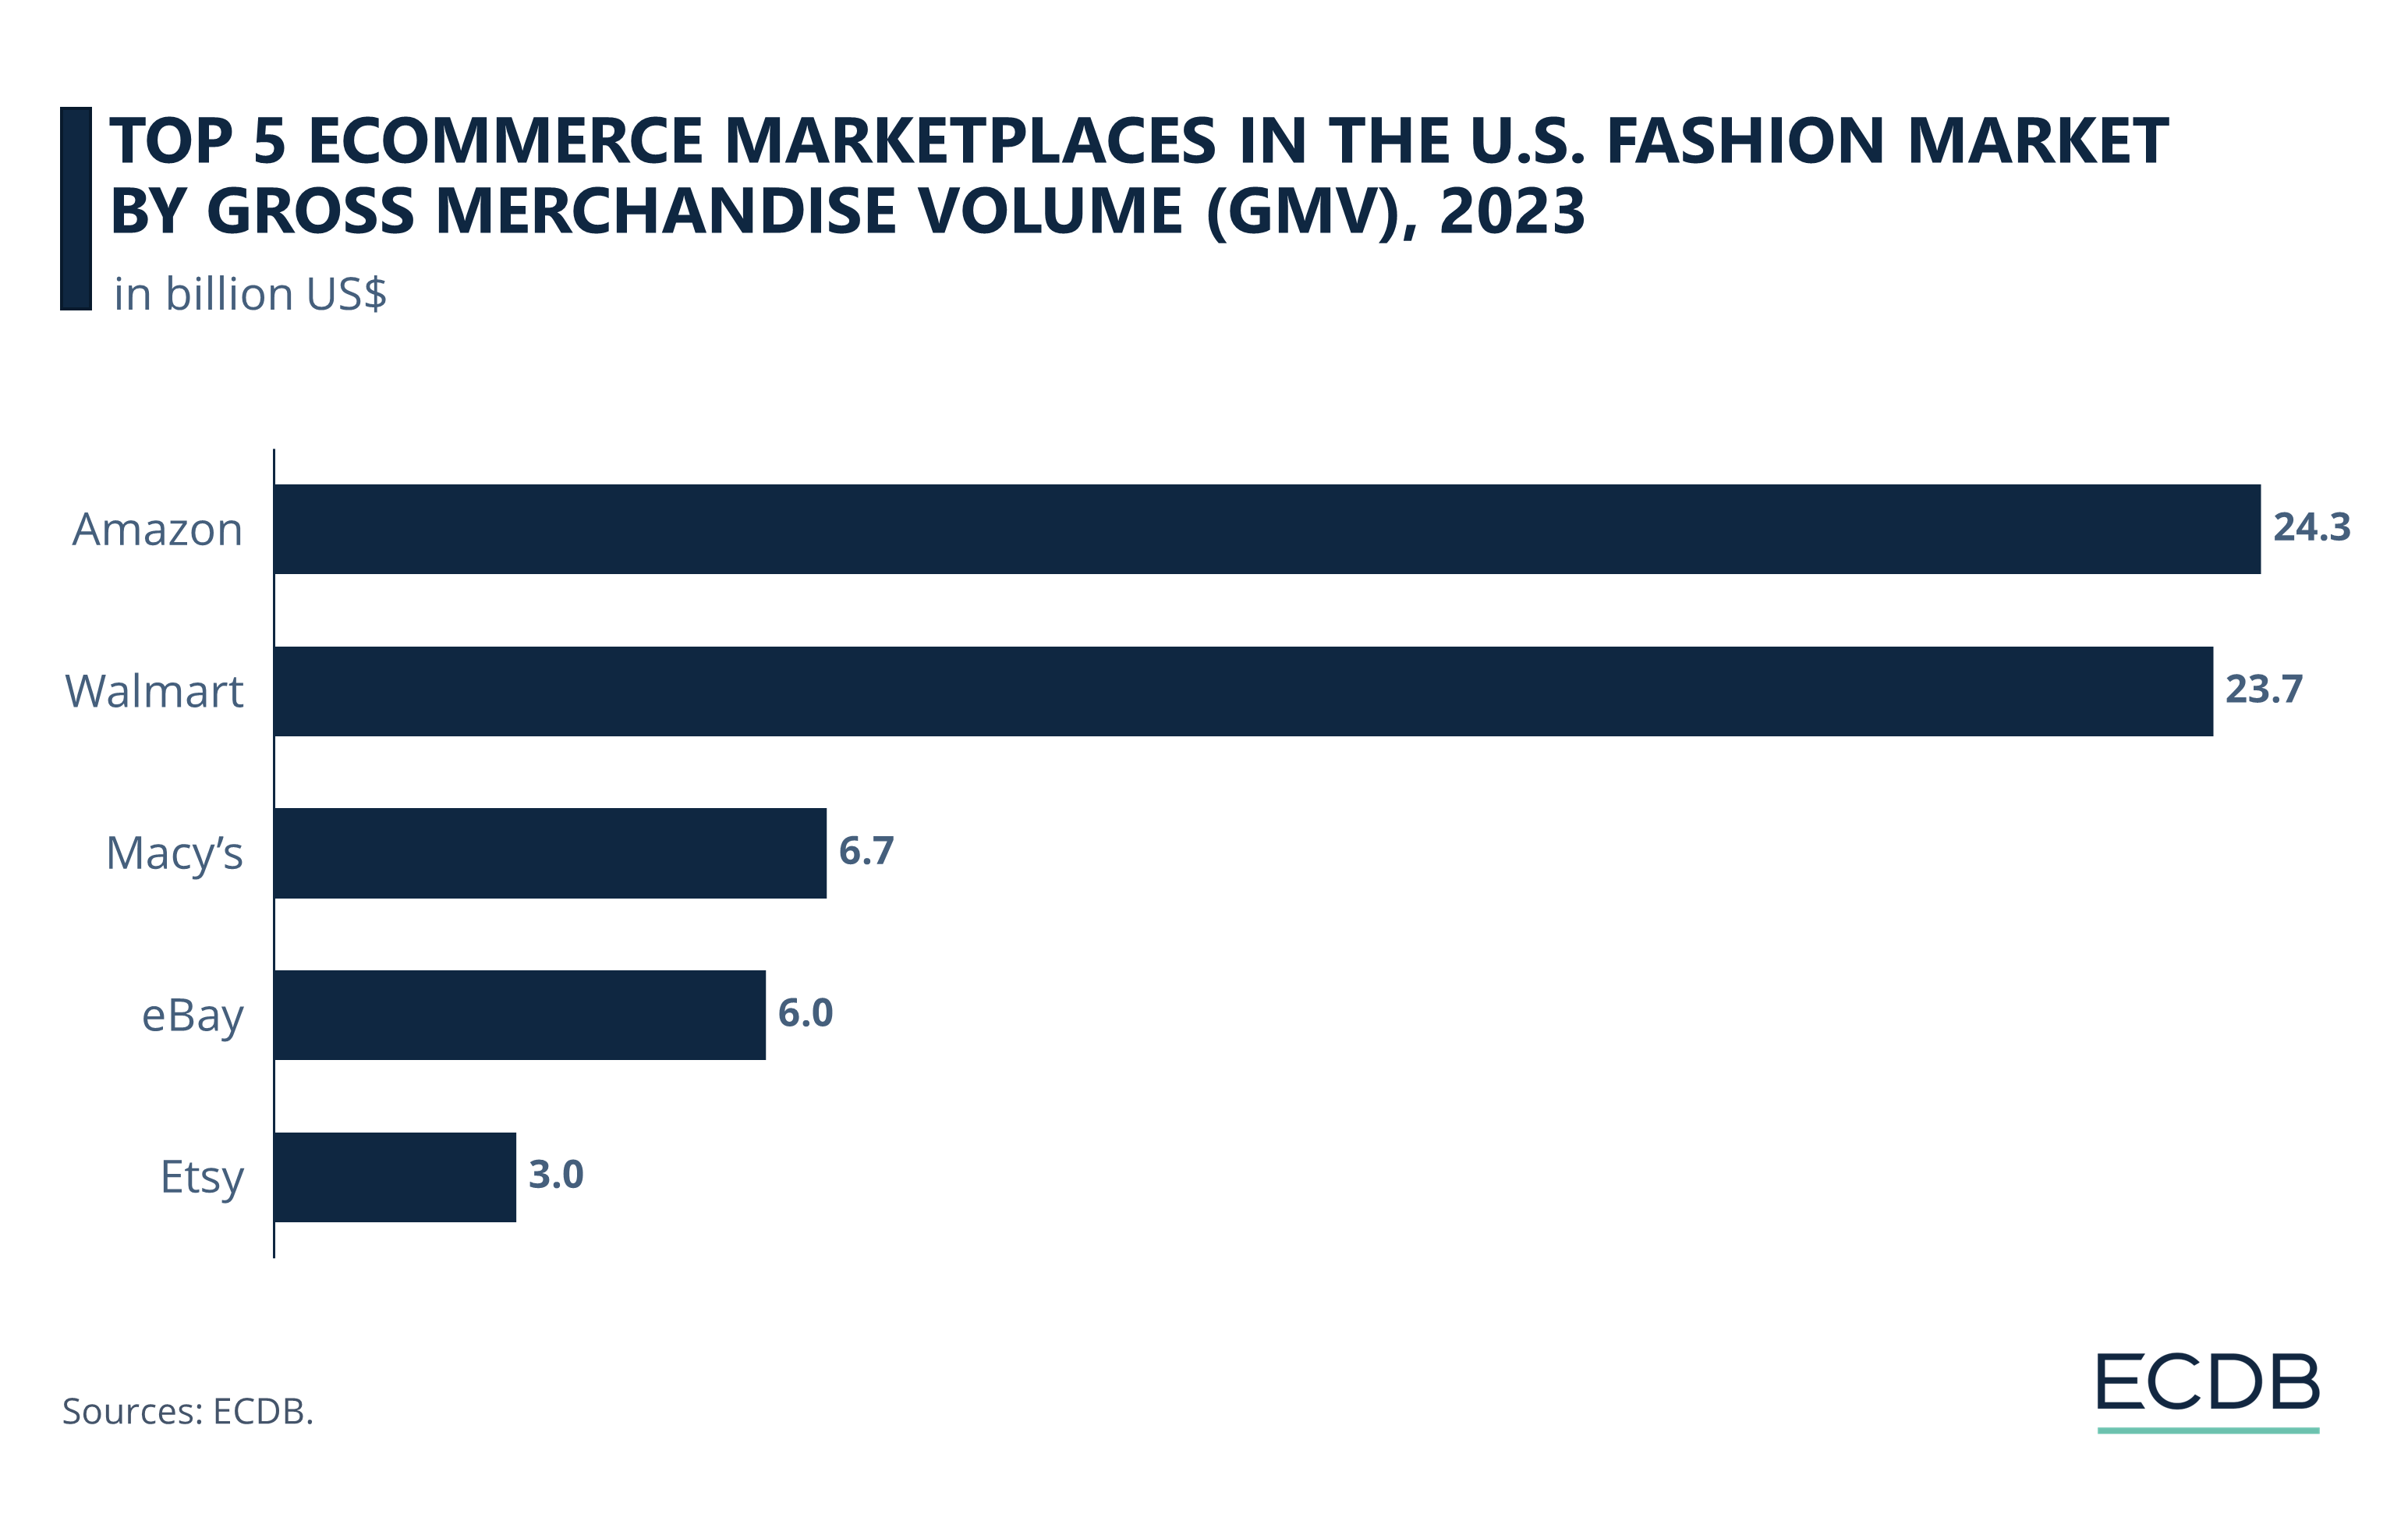 Top 5 Fashion eCommerce Marketplaces in the United States by GMV, 2023